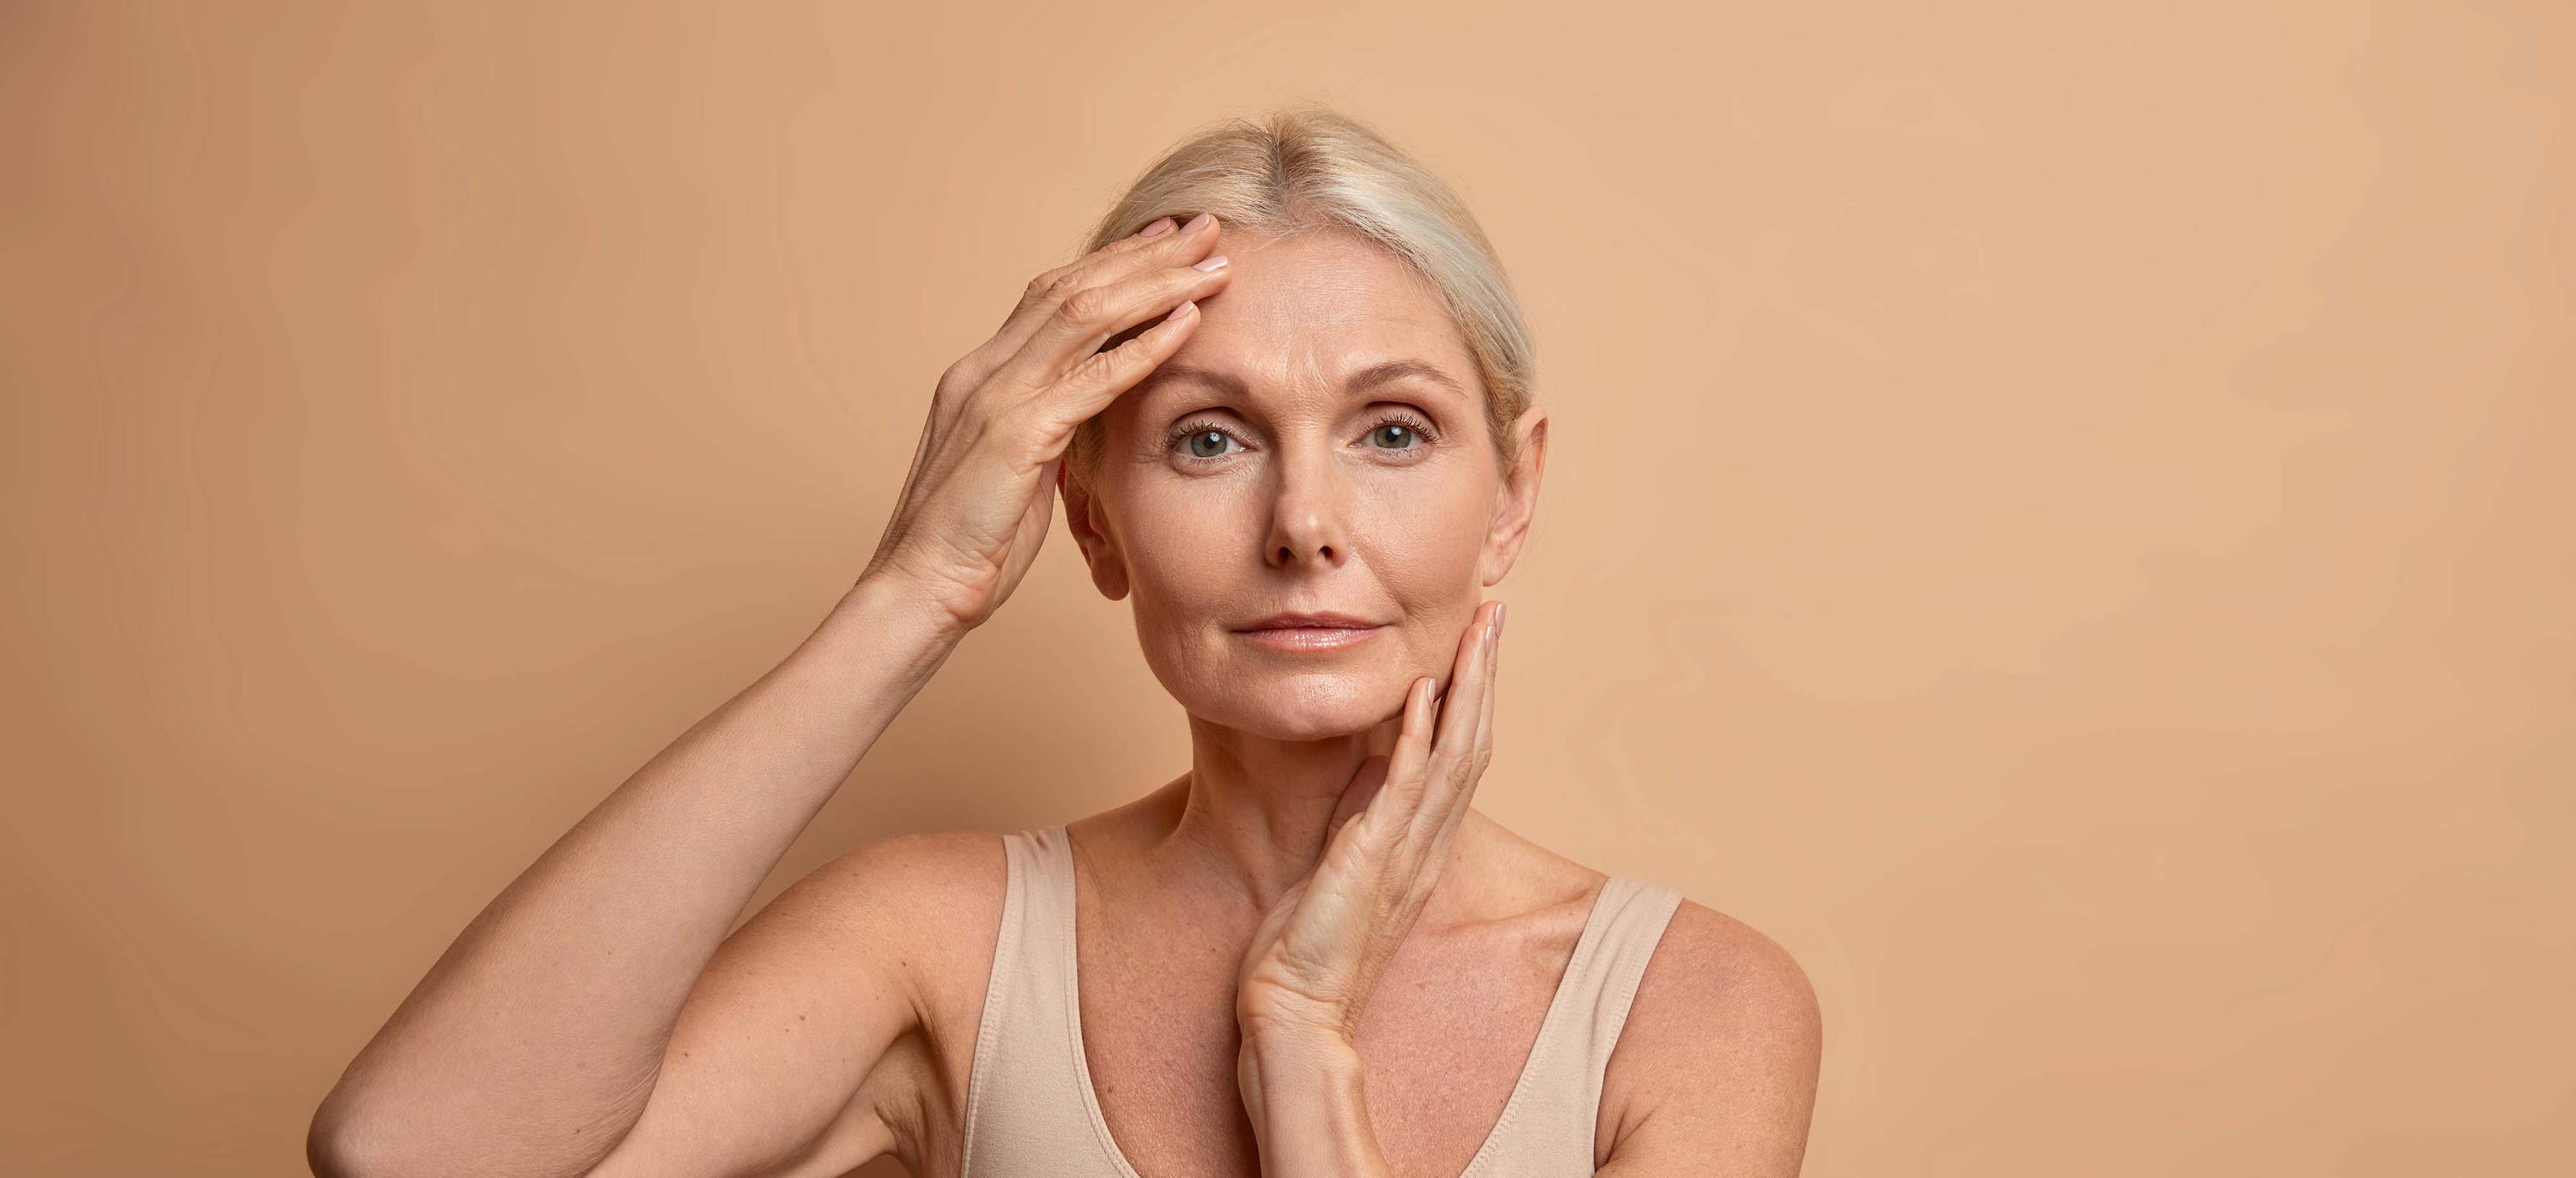 The main ageing damage takes place in the lower areas of the skin